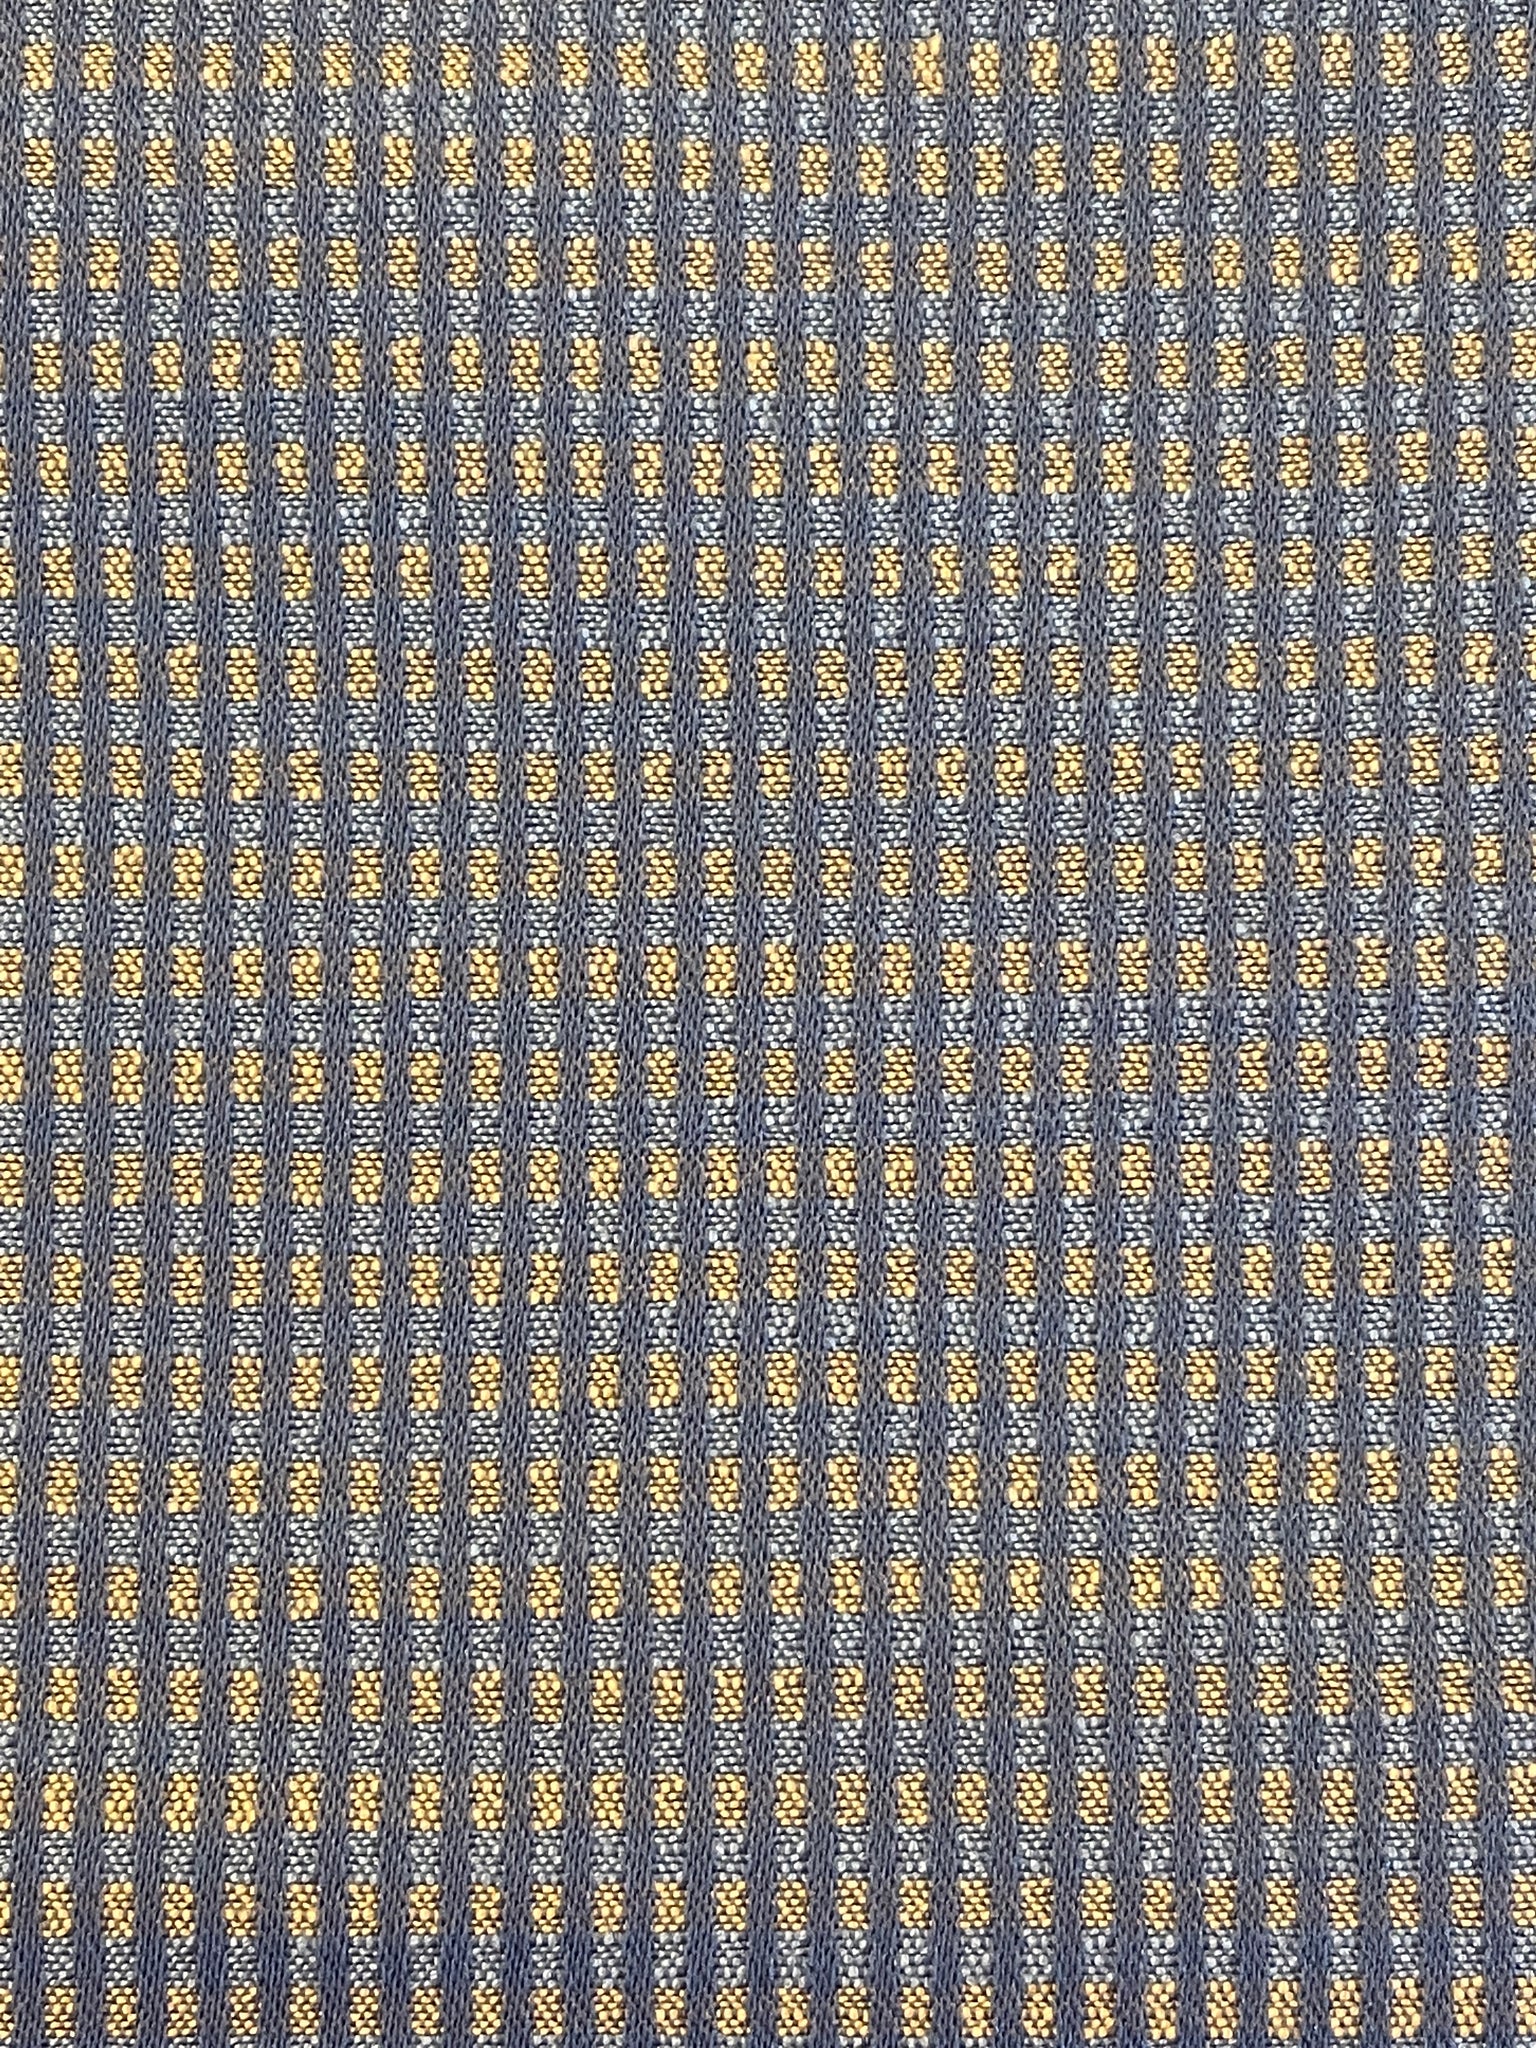 2 3/8 YD Vintage Cotton Blend Home Dec. Yarn Dyed Plaid - Blue and Yellow